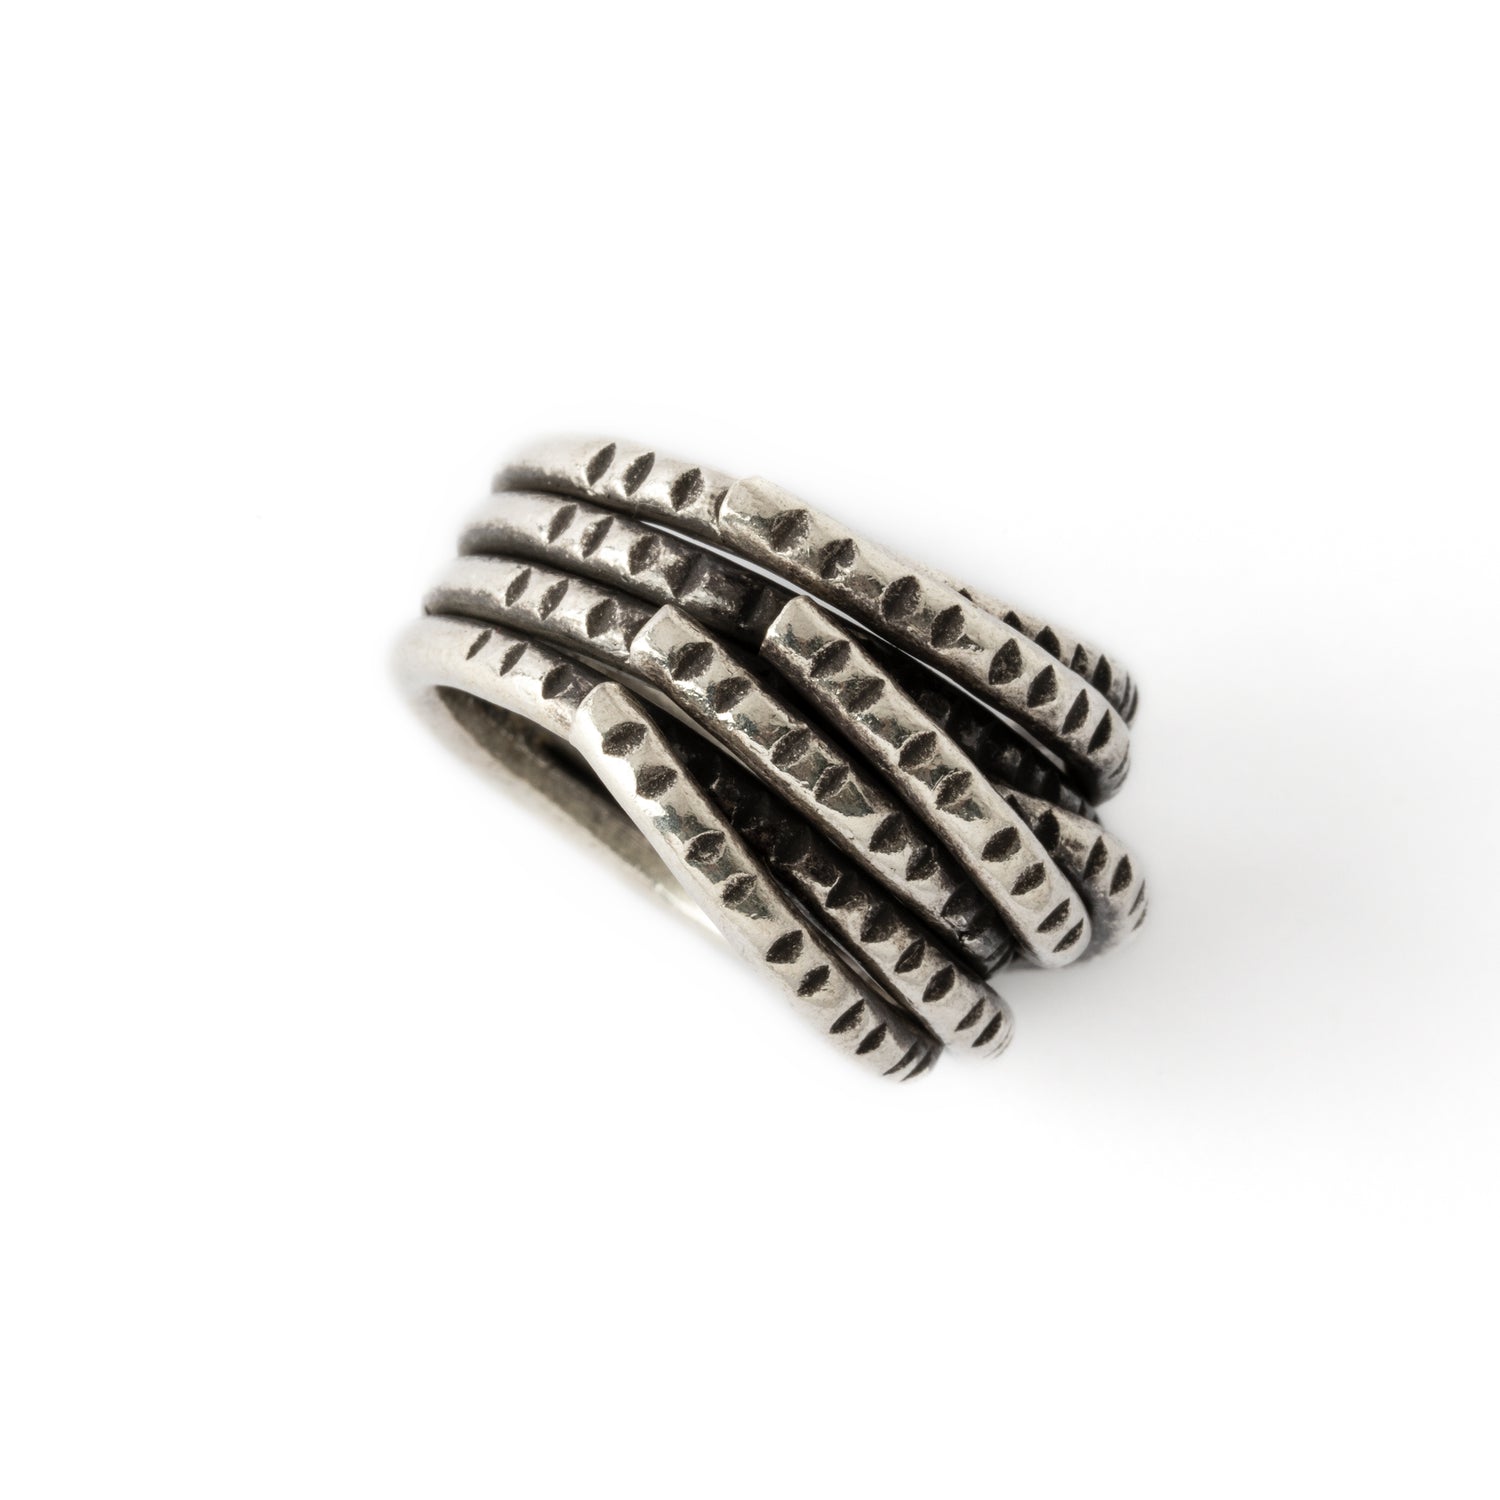 95% tribal silver chunky ring with layered design 